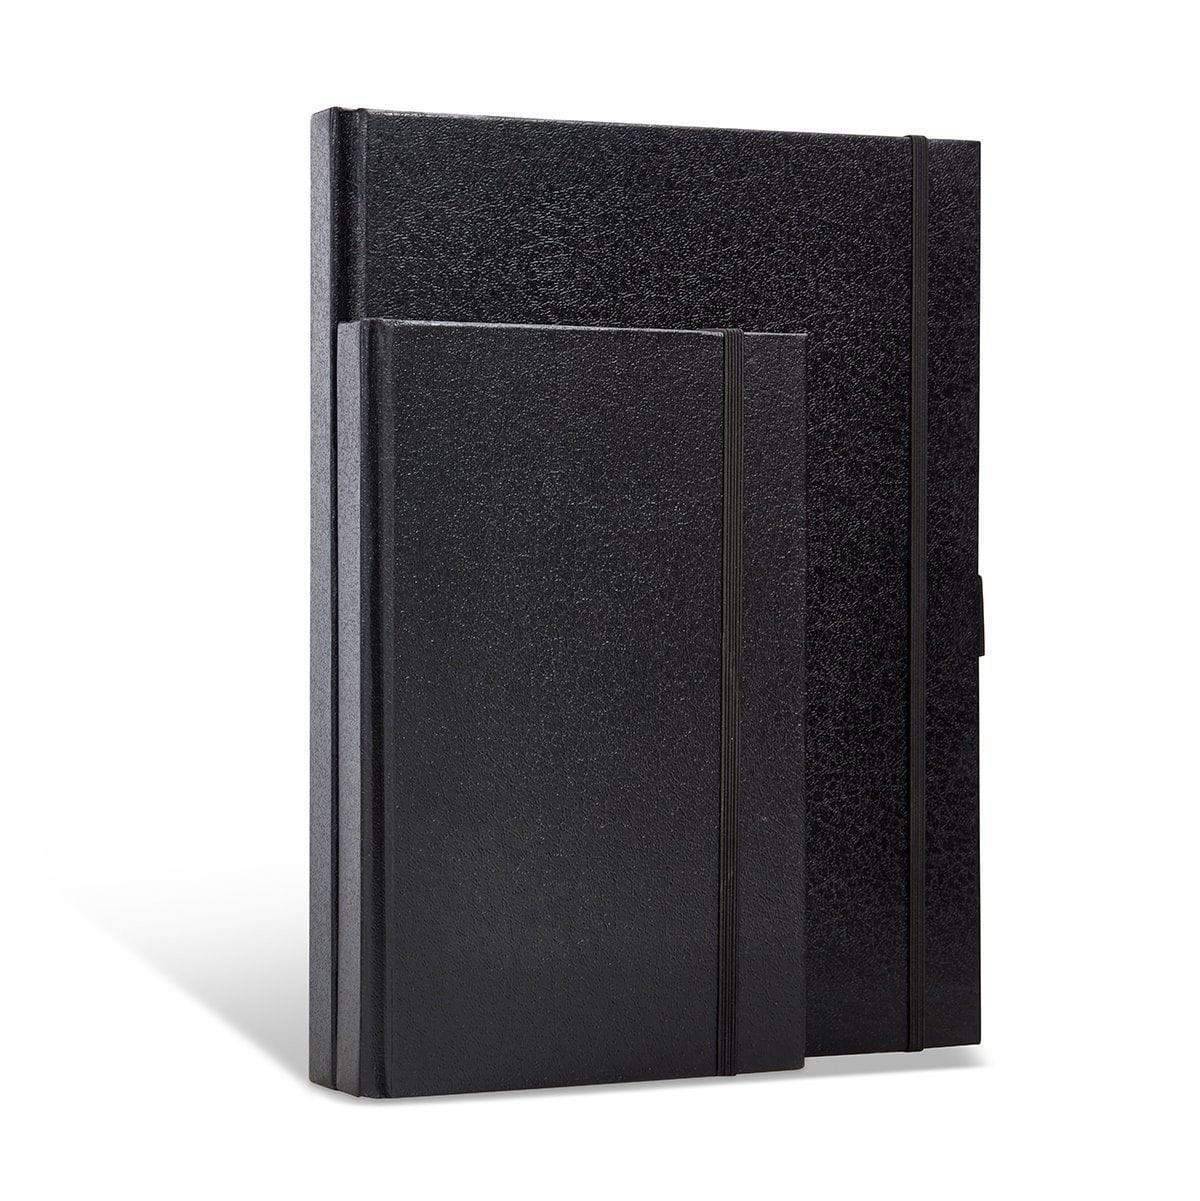 Campap Arto Hard Cover Sketch Book 110g 60sht - CWArt : Inspired